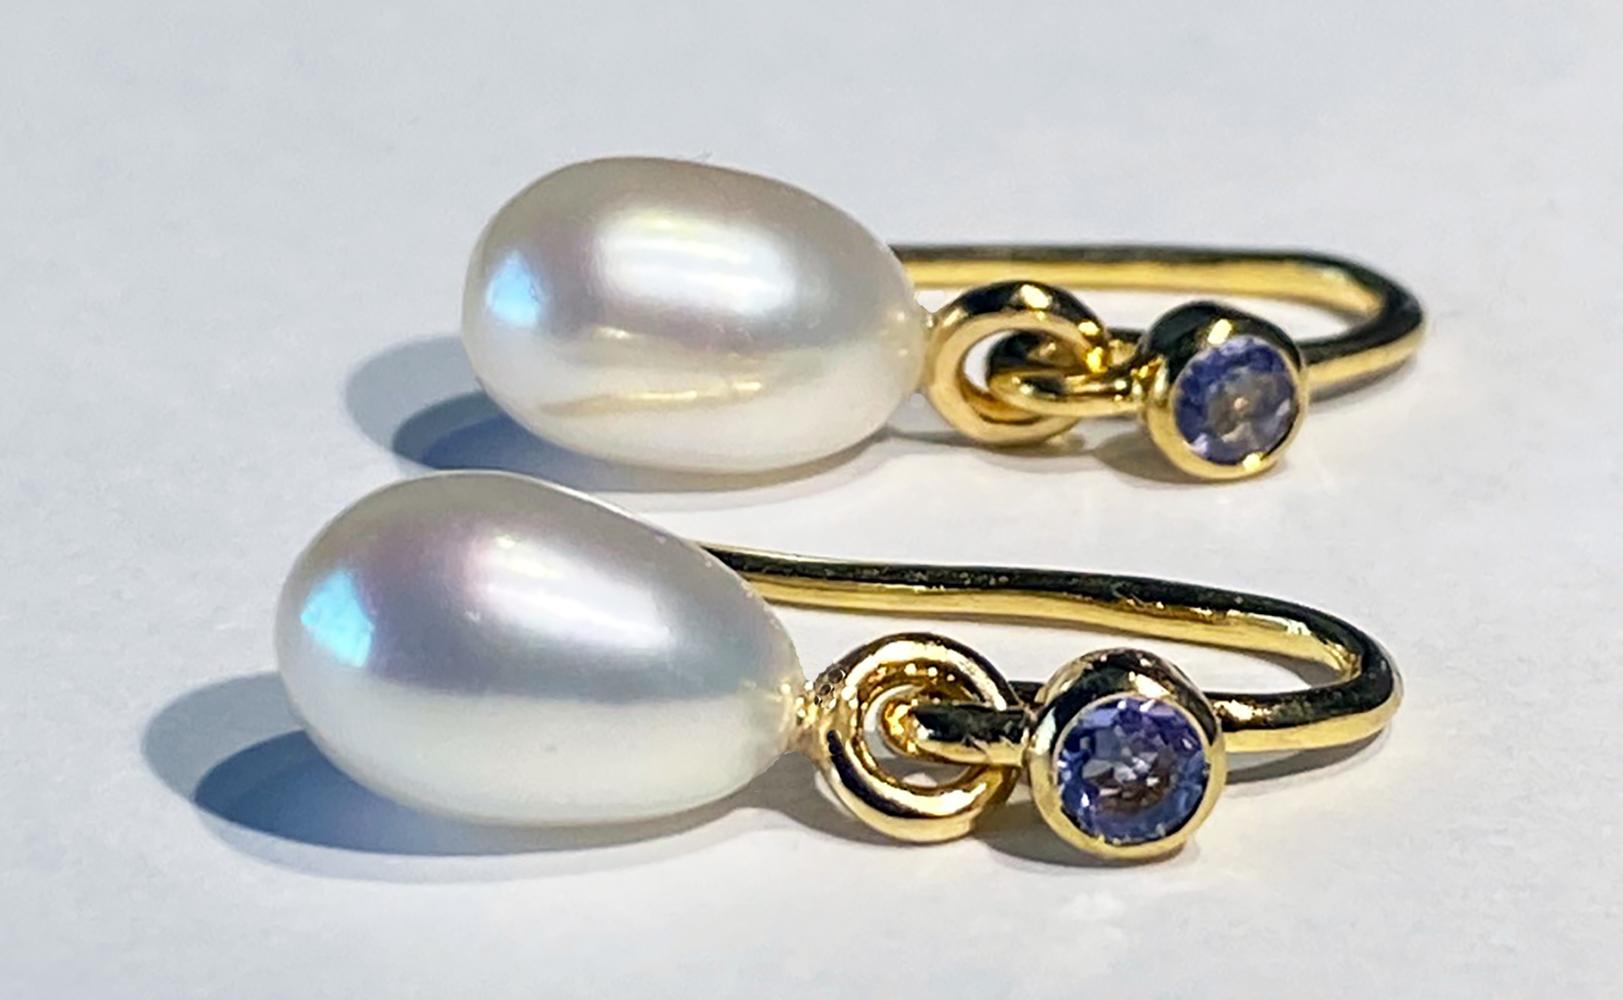 A pair of Kary Adam Designed, 14kt Gold & Silver Pearl Dangle Earrings with Tanzanite Accents. 

Originally from San Diego, California, Kary Adam lived in the “Gem Capital of the World” - Bangkok, Thailand, sourcing local gem stones and working with